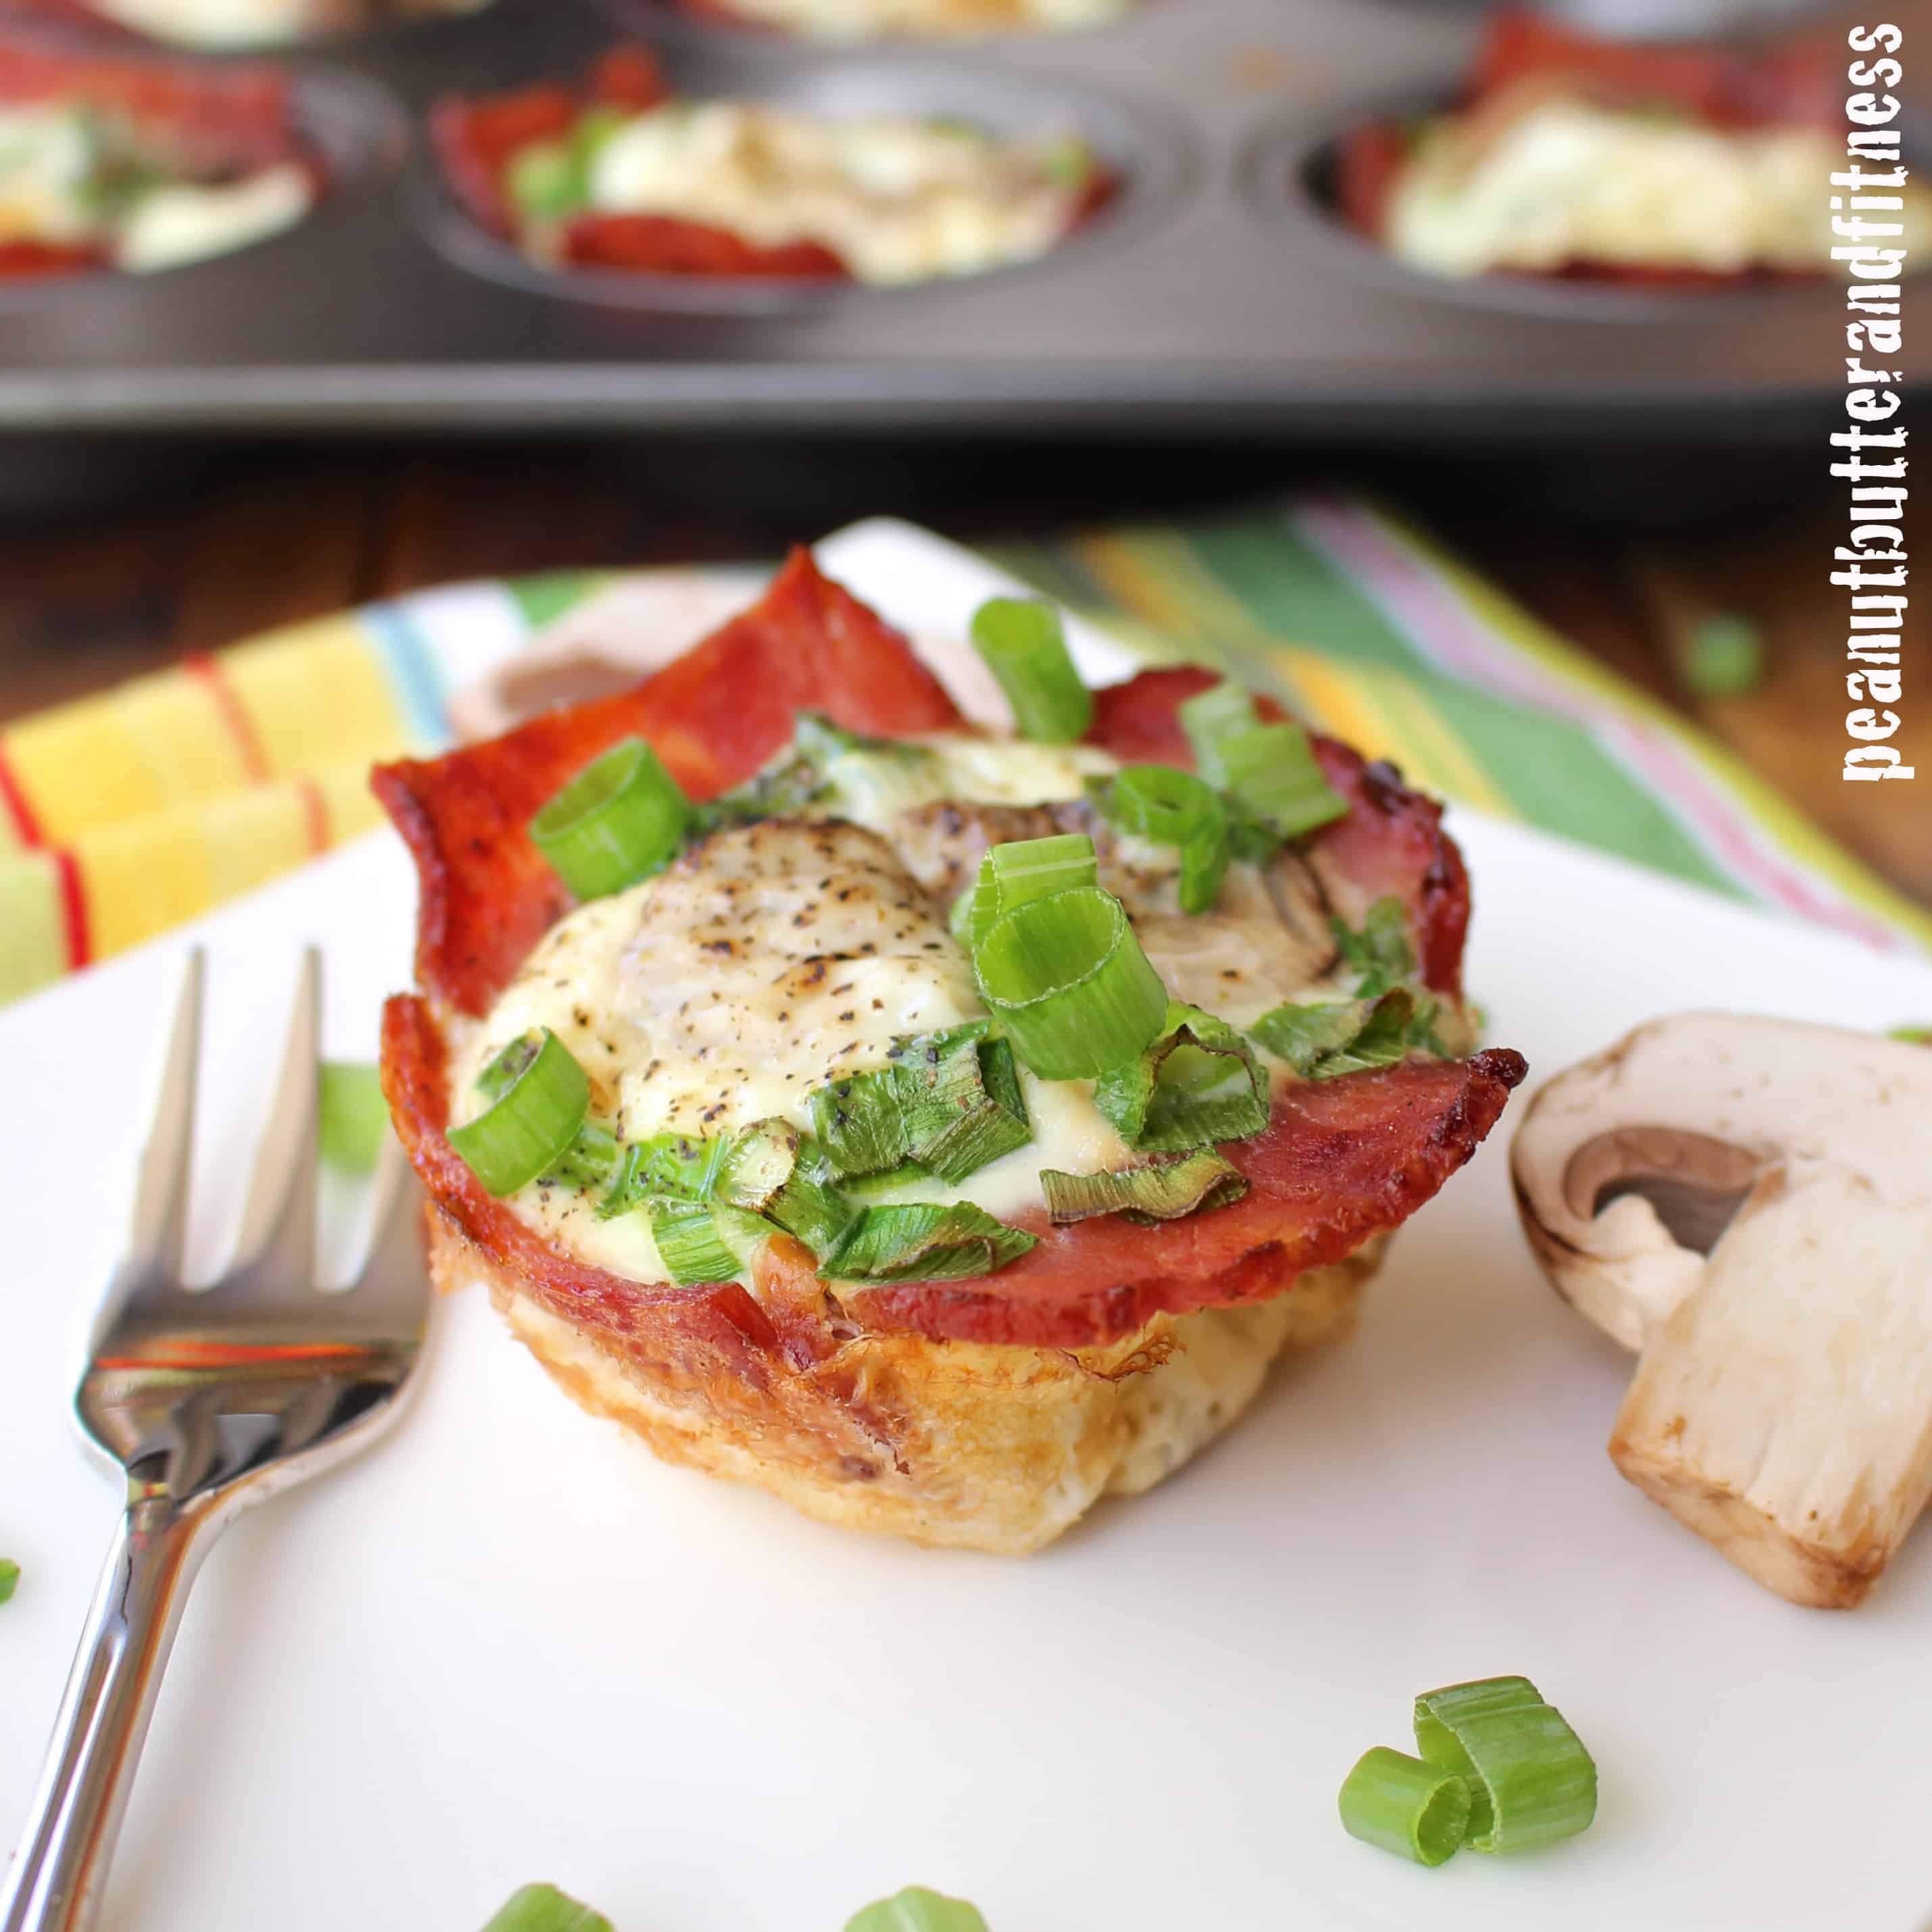 Turkey Bacon and Egg White Muffins